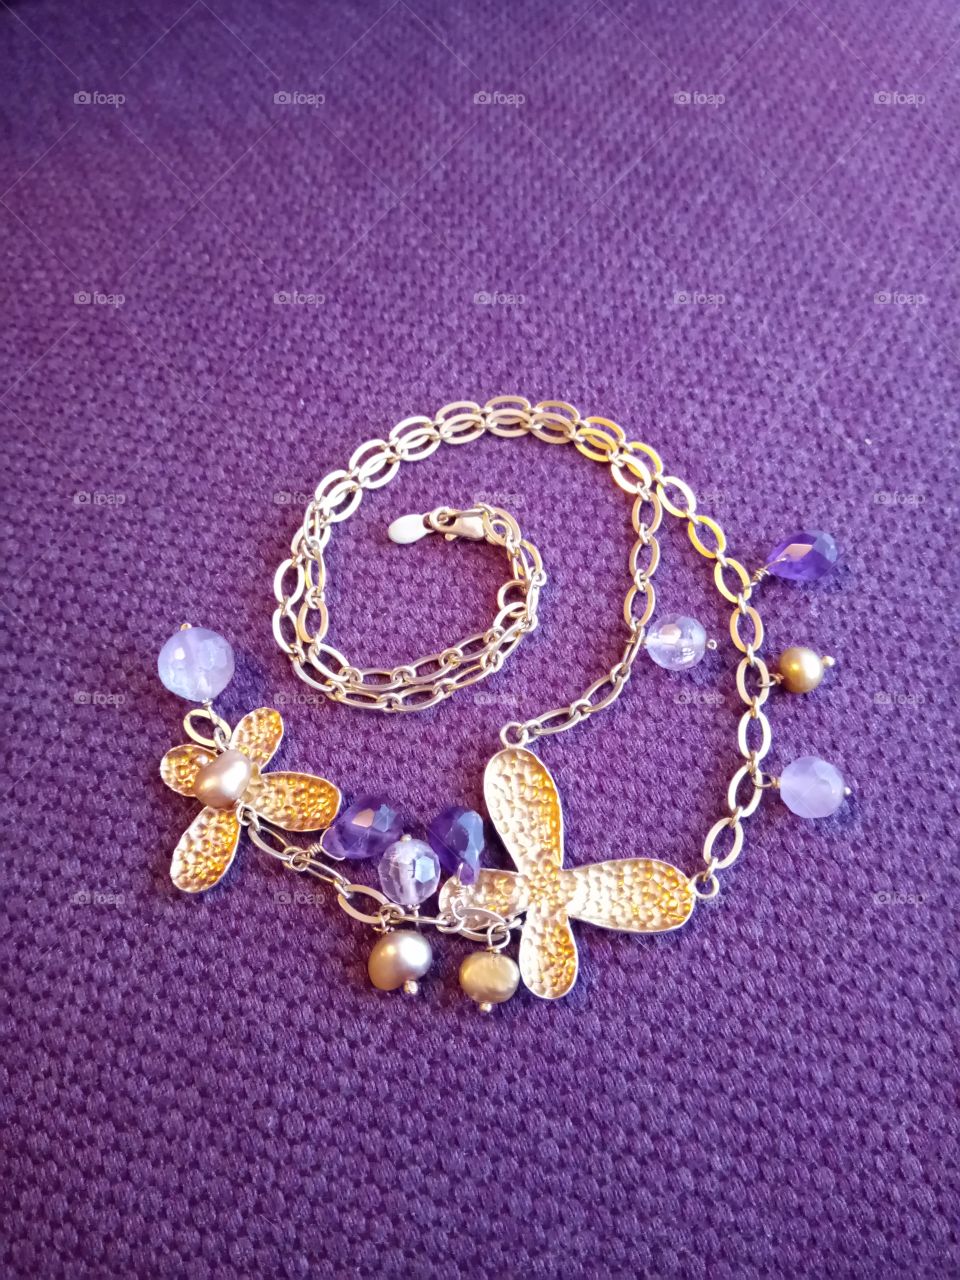 Purple and gold necklace